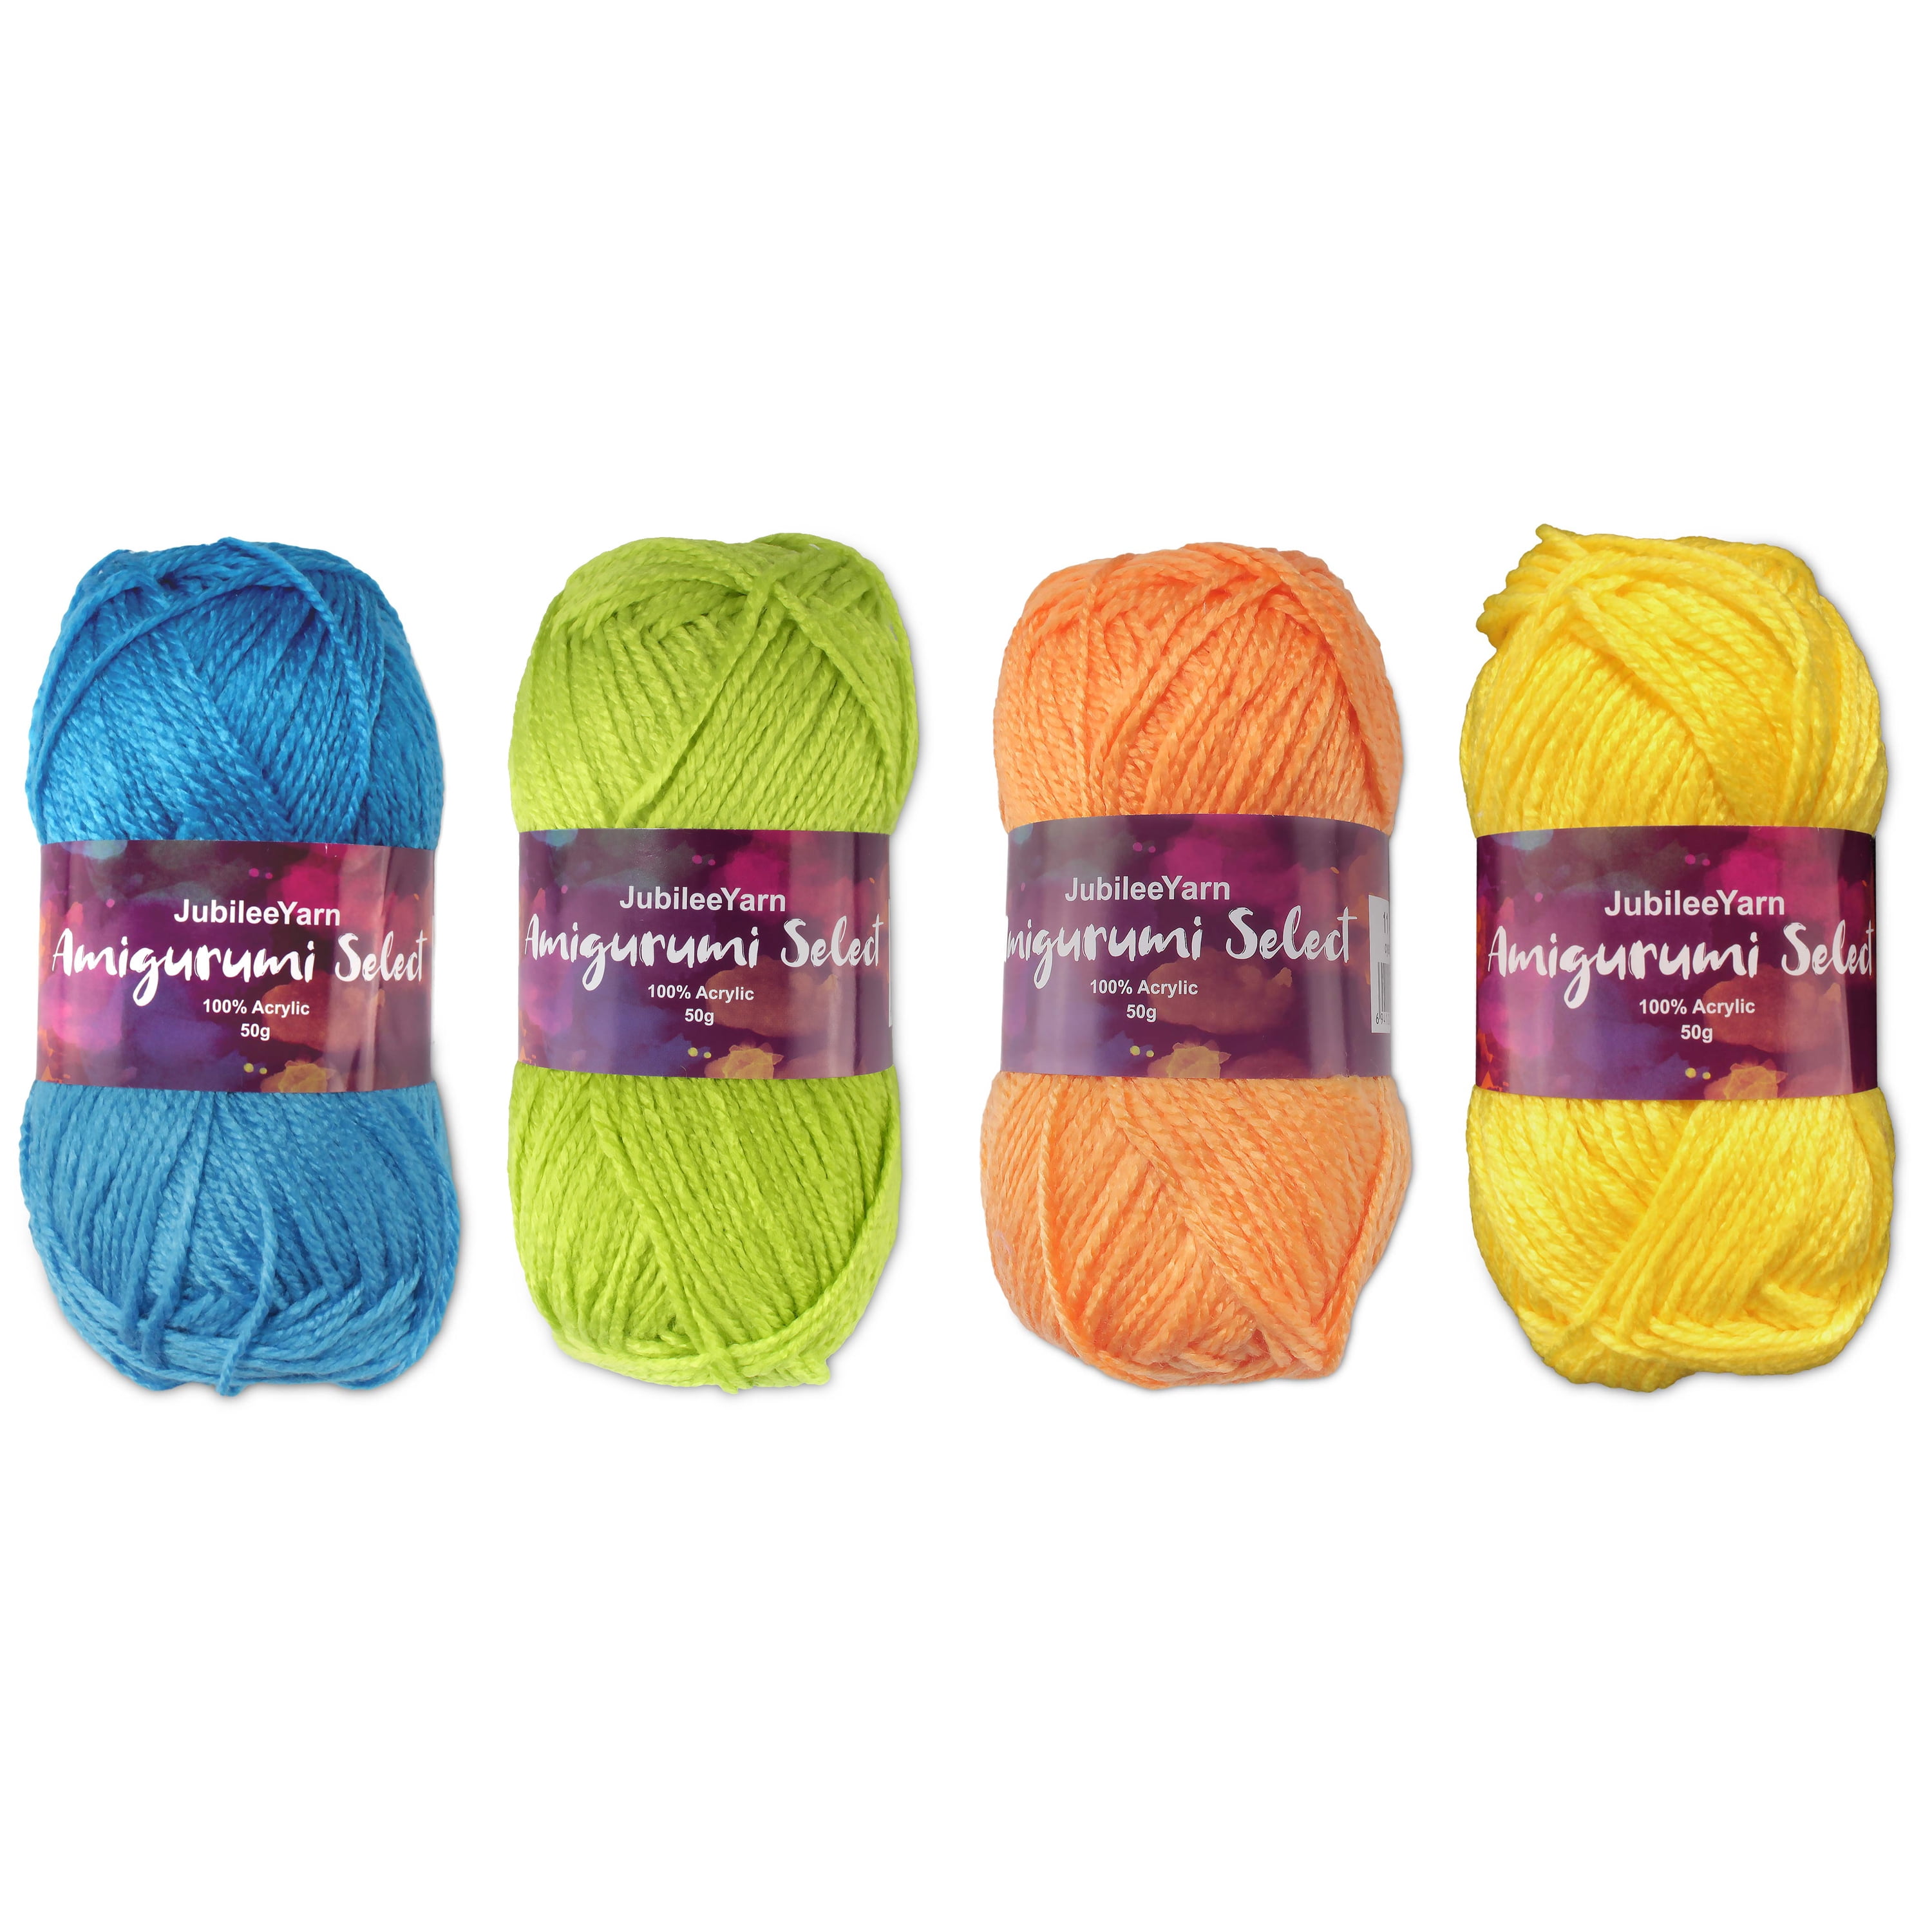 Soft Classic Multi Ombre Yarn by Loops & Threads - Multicolor Yarn for  Knitting, Crochet, Weaving, Arts & Crafts - Orchard Mist, Bulk 12 Pack 